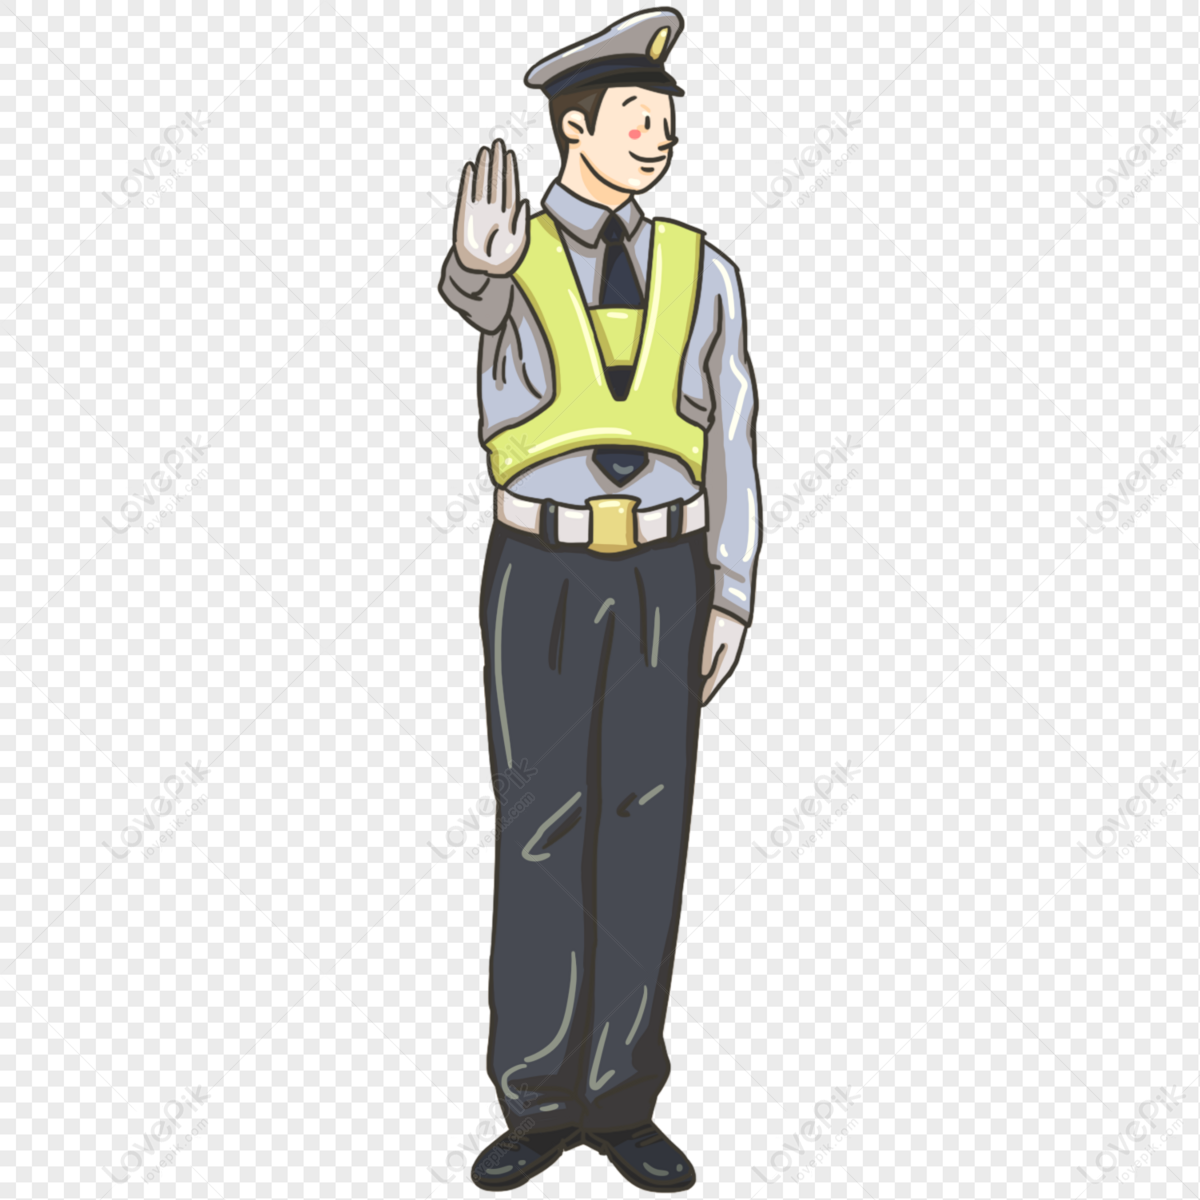 Traffic Police PNG Picture And Clipart Image For Free Download - Lovepik |  401076685